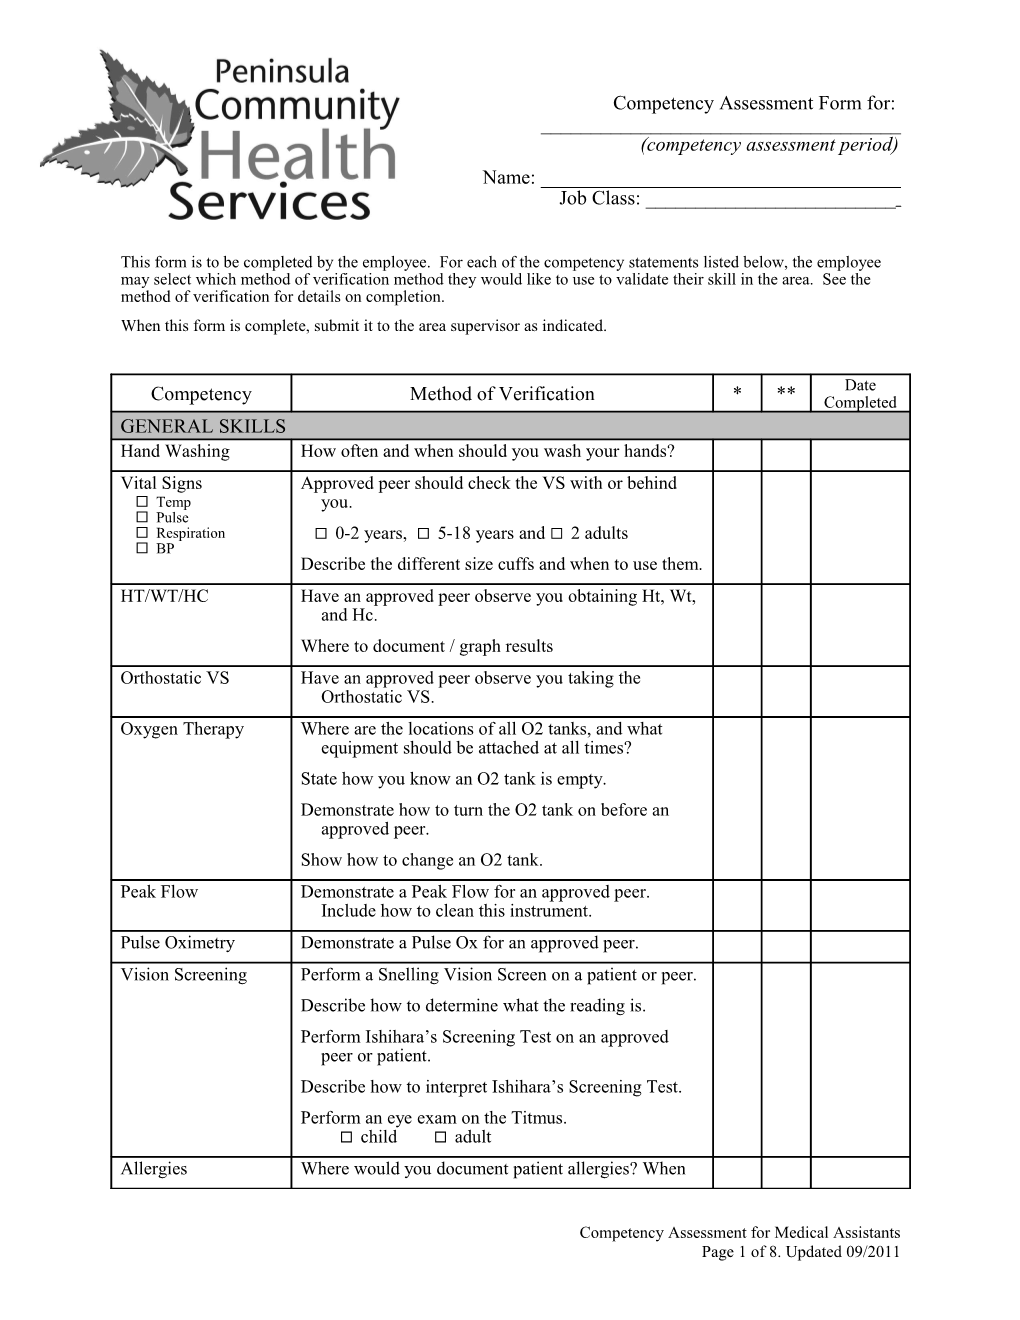 Competency Assessment Form For